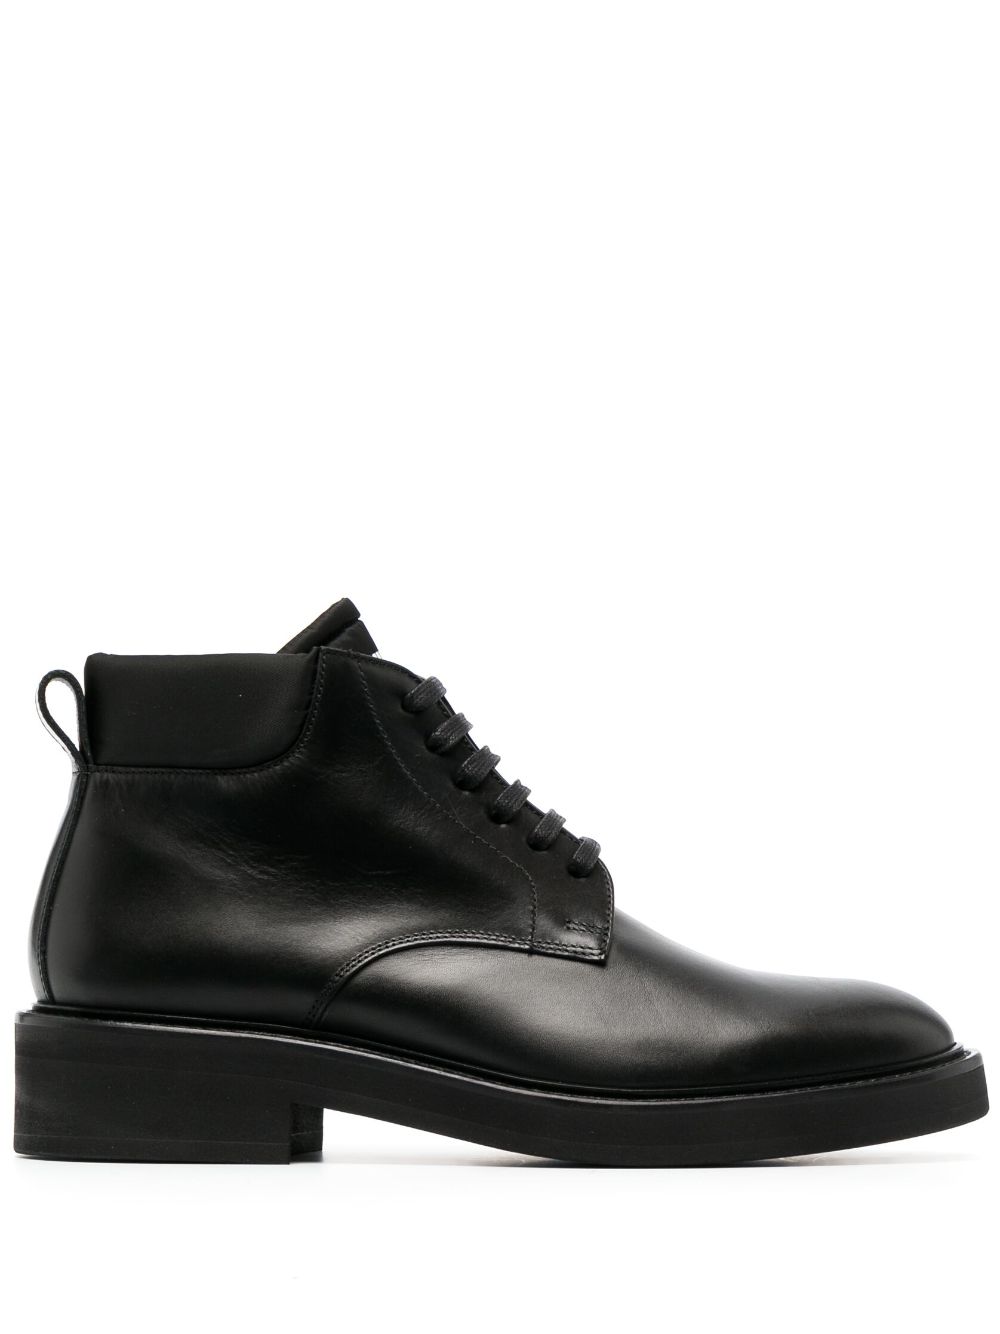 Dsquared2 x Manchester City ankle leather boots - Black von Dsquared2